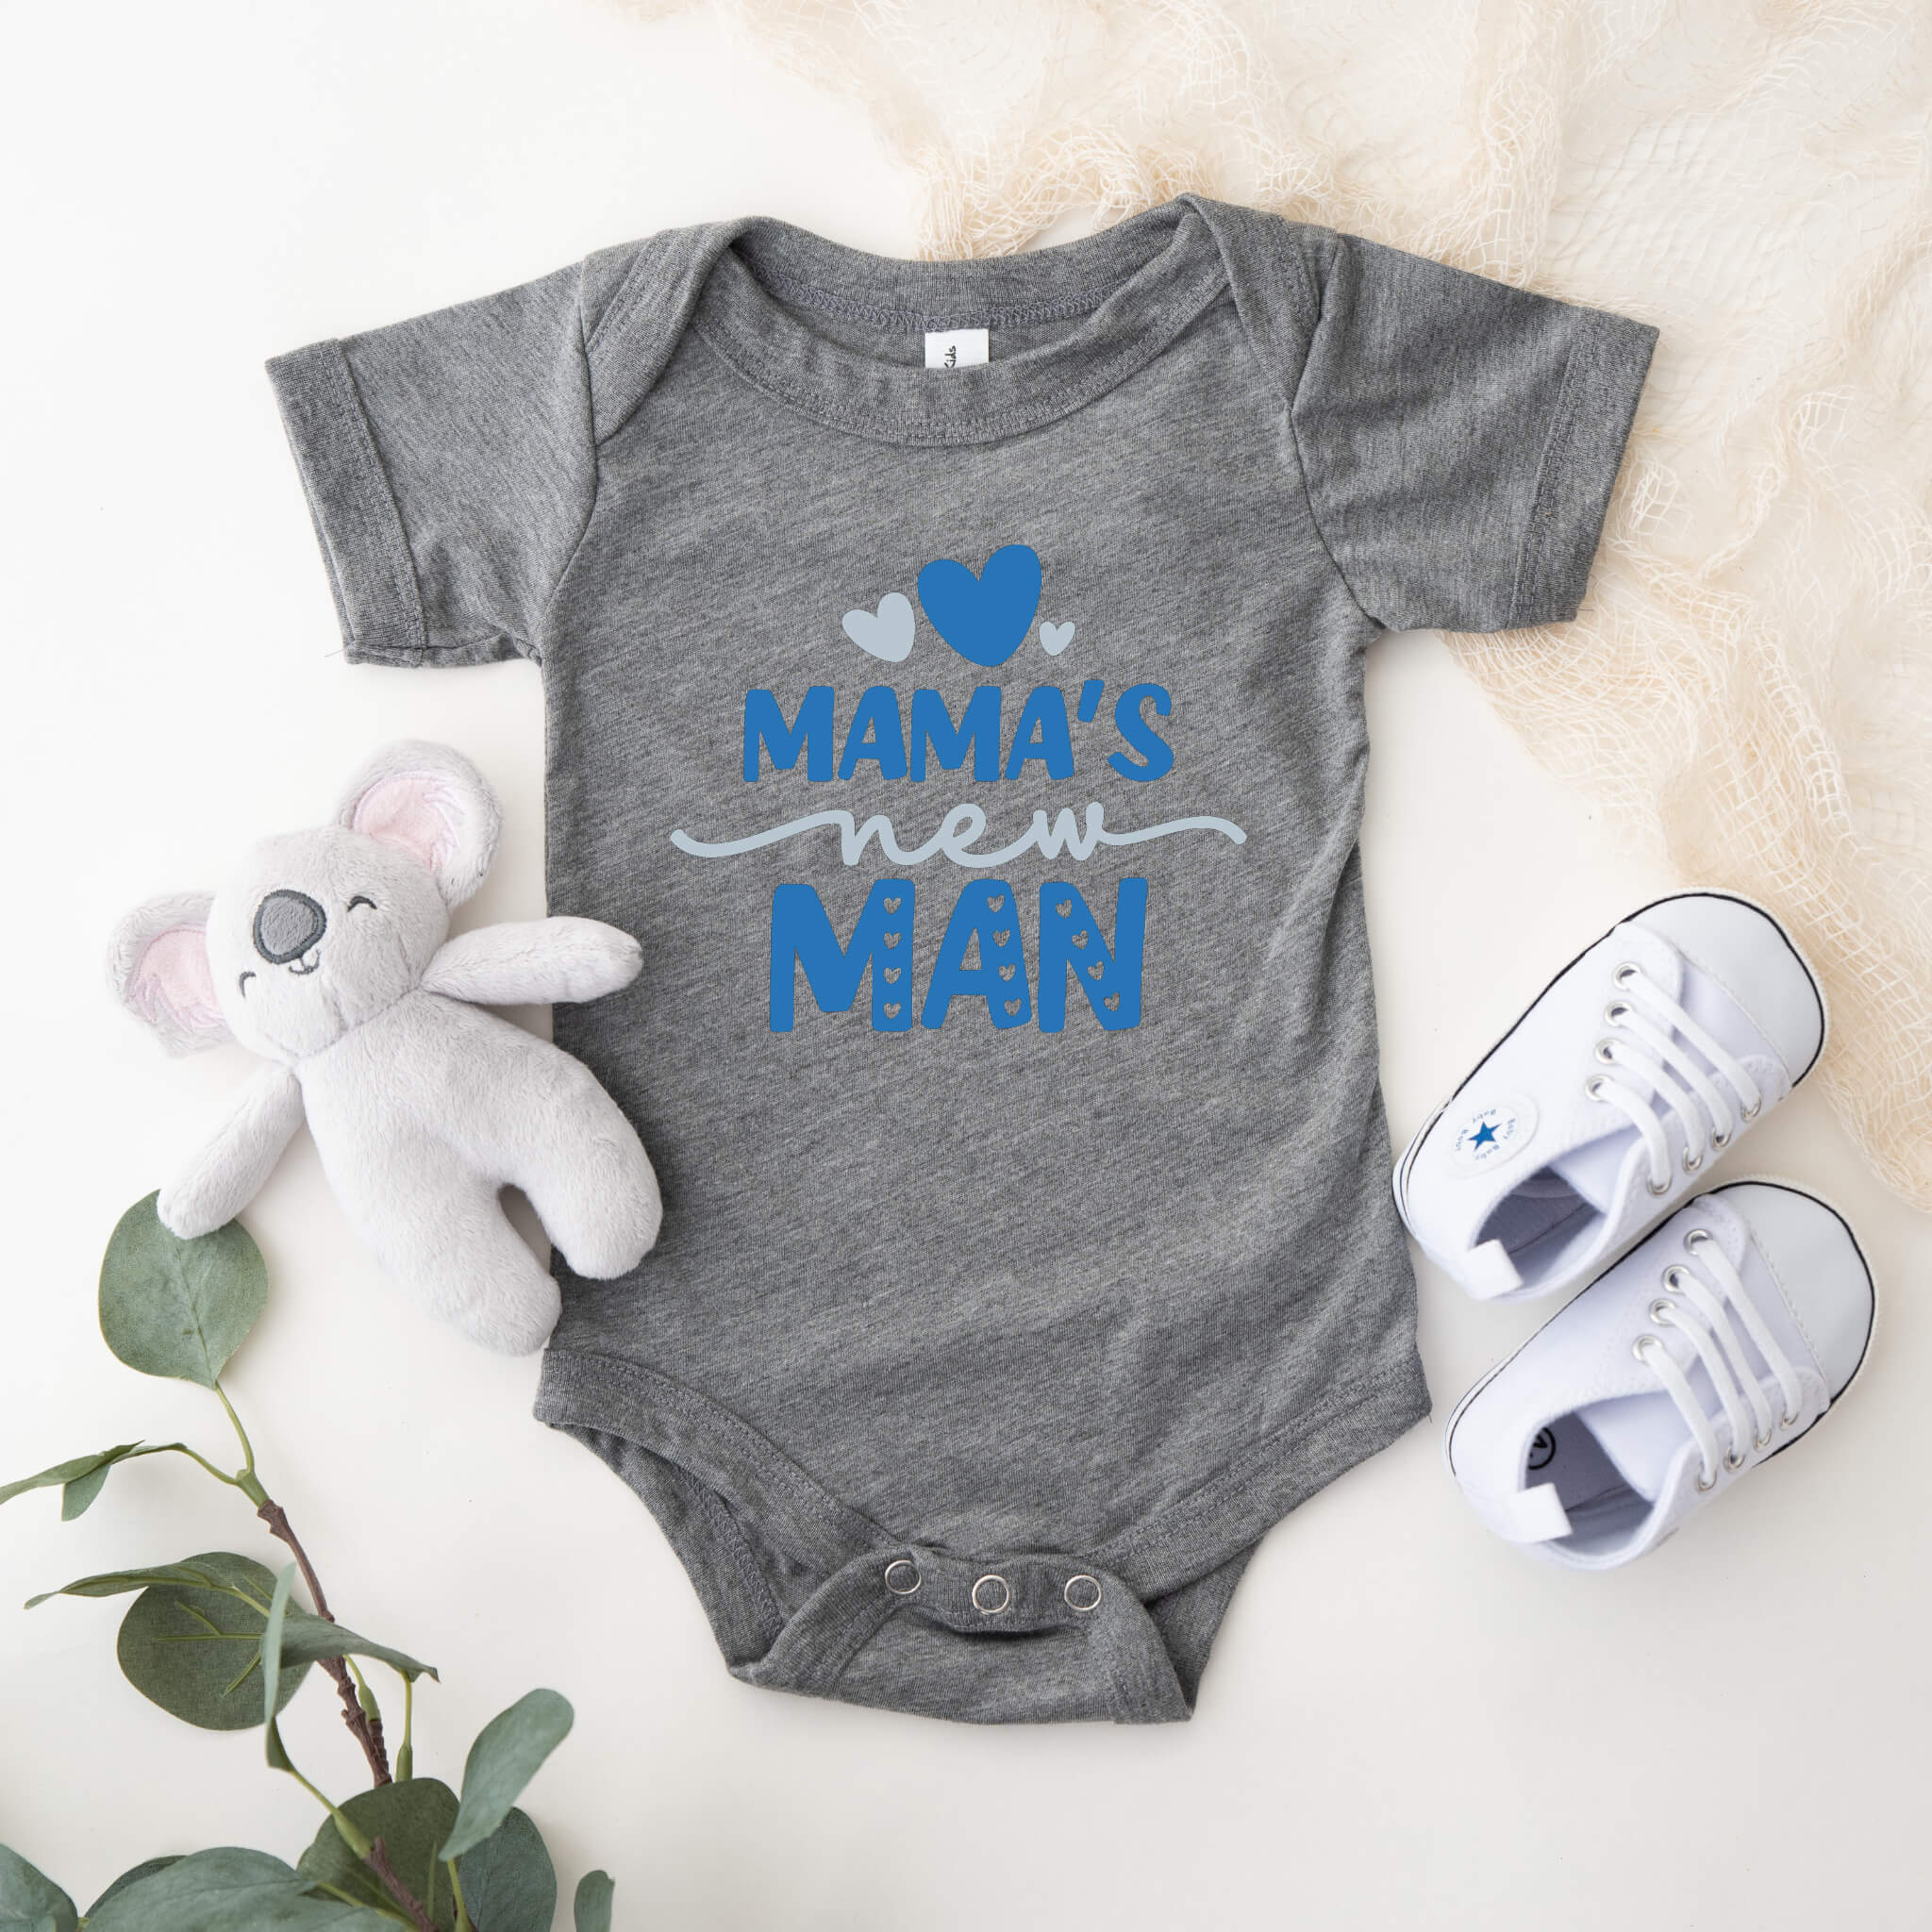 New Baby Boy Onesie, Mama’s New Man Baby Bodysuit, Boy’s Baby Shower Gift, New Baby Take Home Outfit, Maternity Photo Prop Onesie, Cute Baby Boy’s Outfit